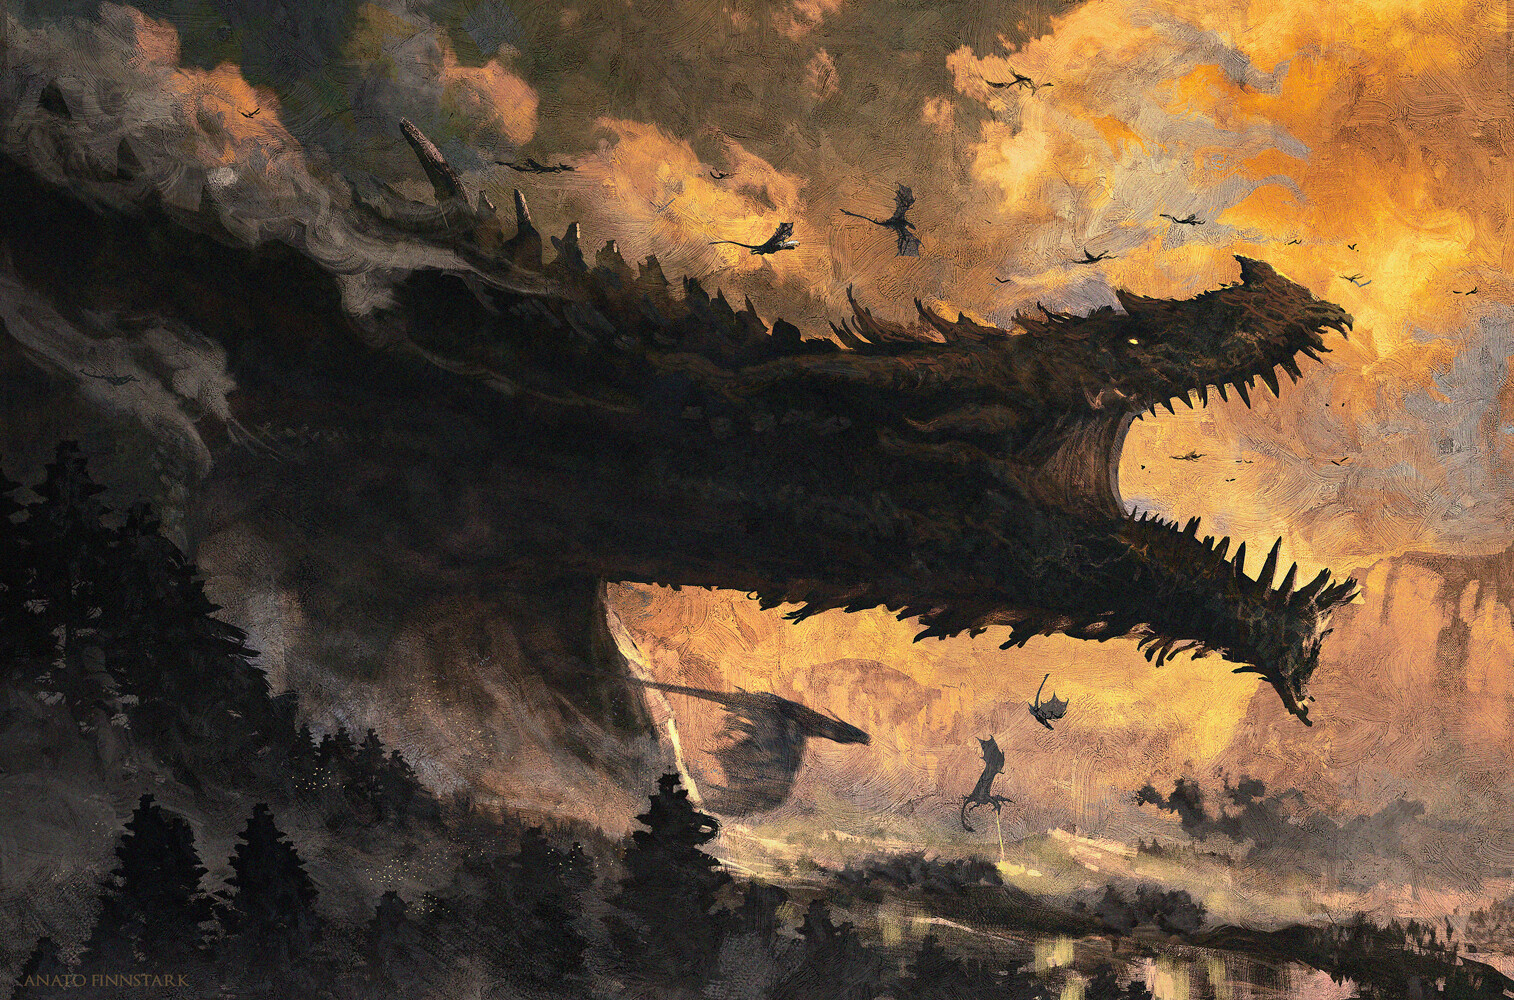 Fantasy Art Artwork The Lord Of The Rings The Silmarillion Dragon Middle Earth Ancalagon The Black A 1514x1000